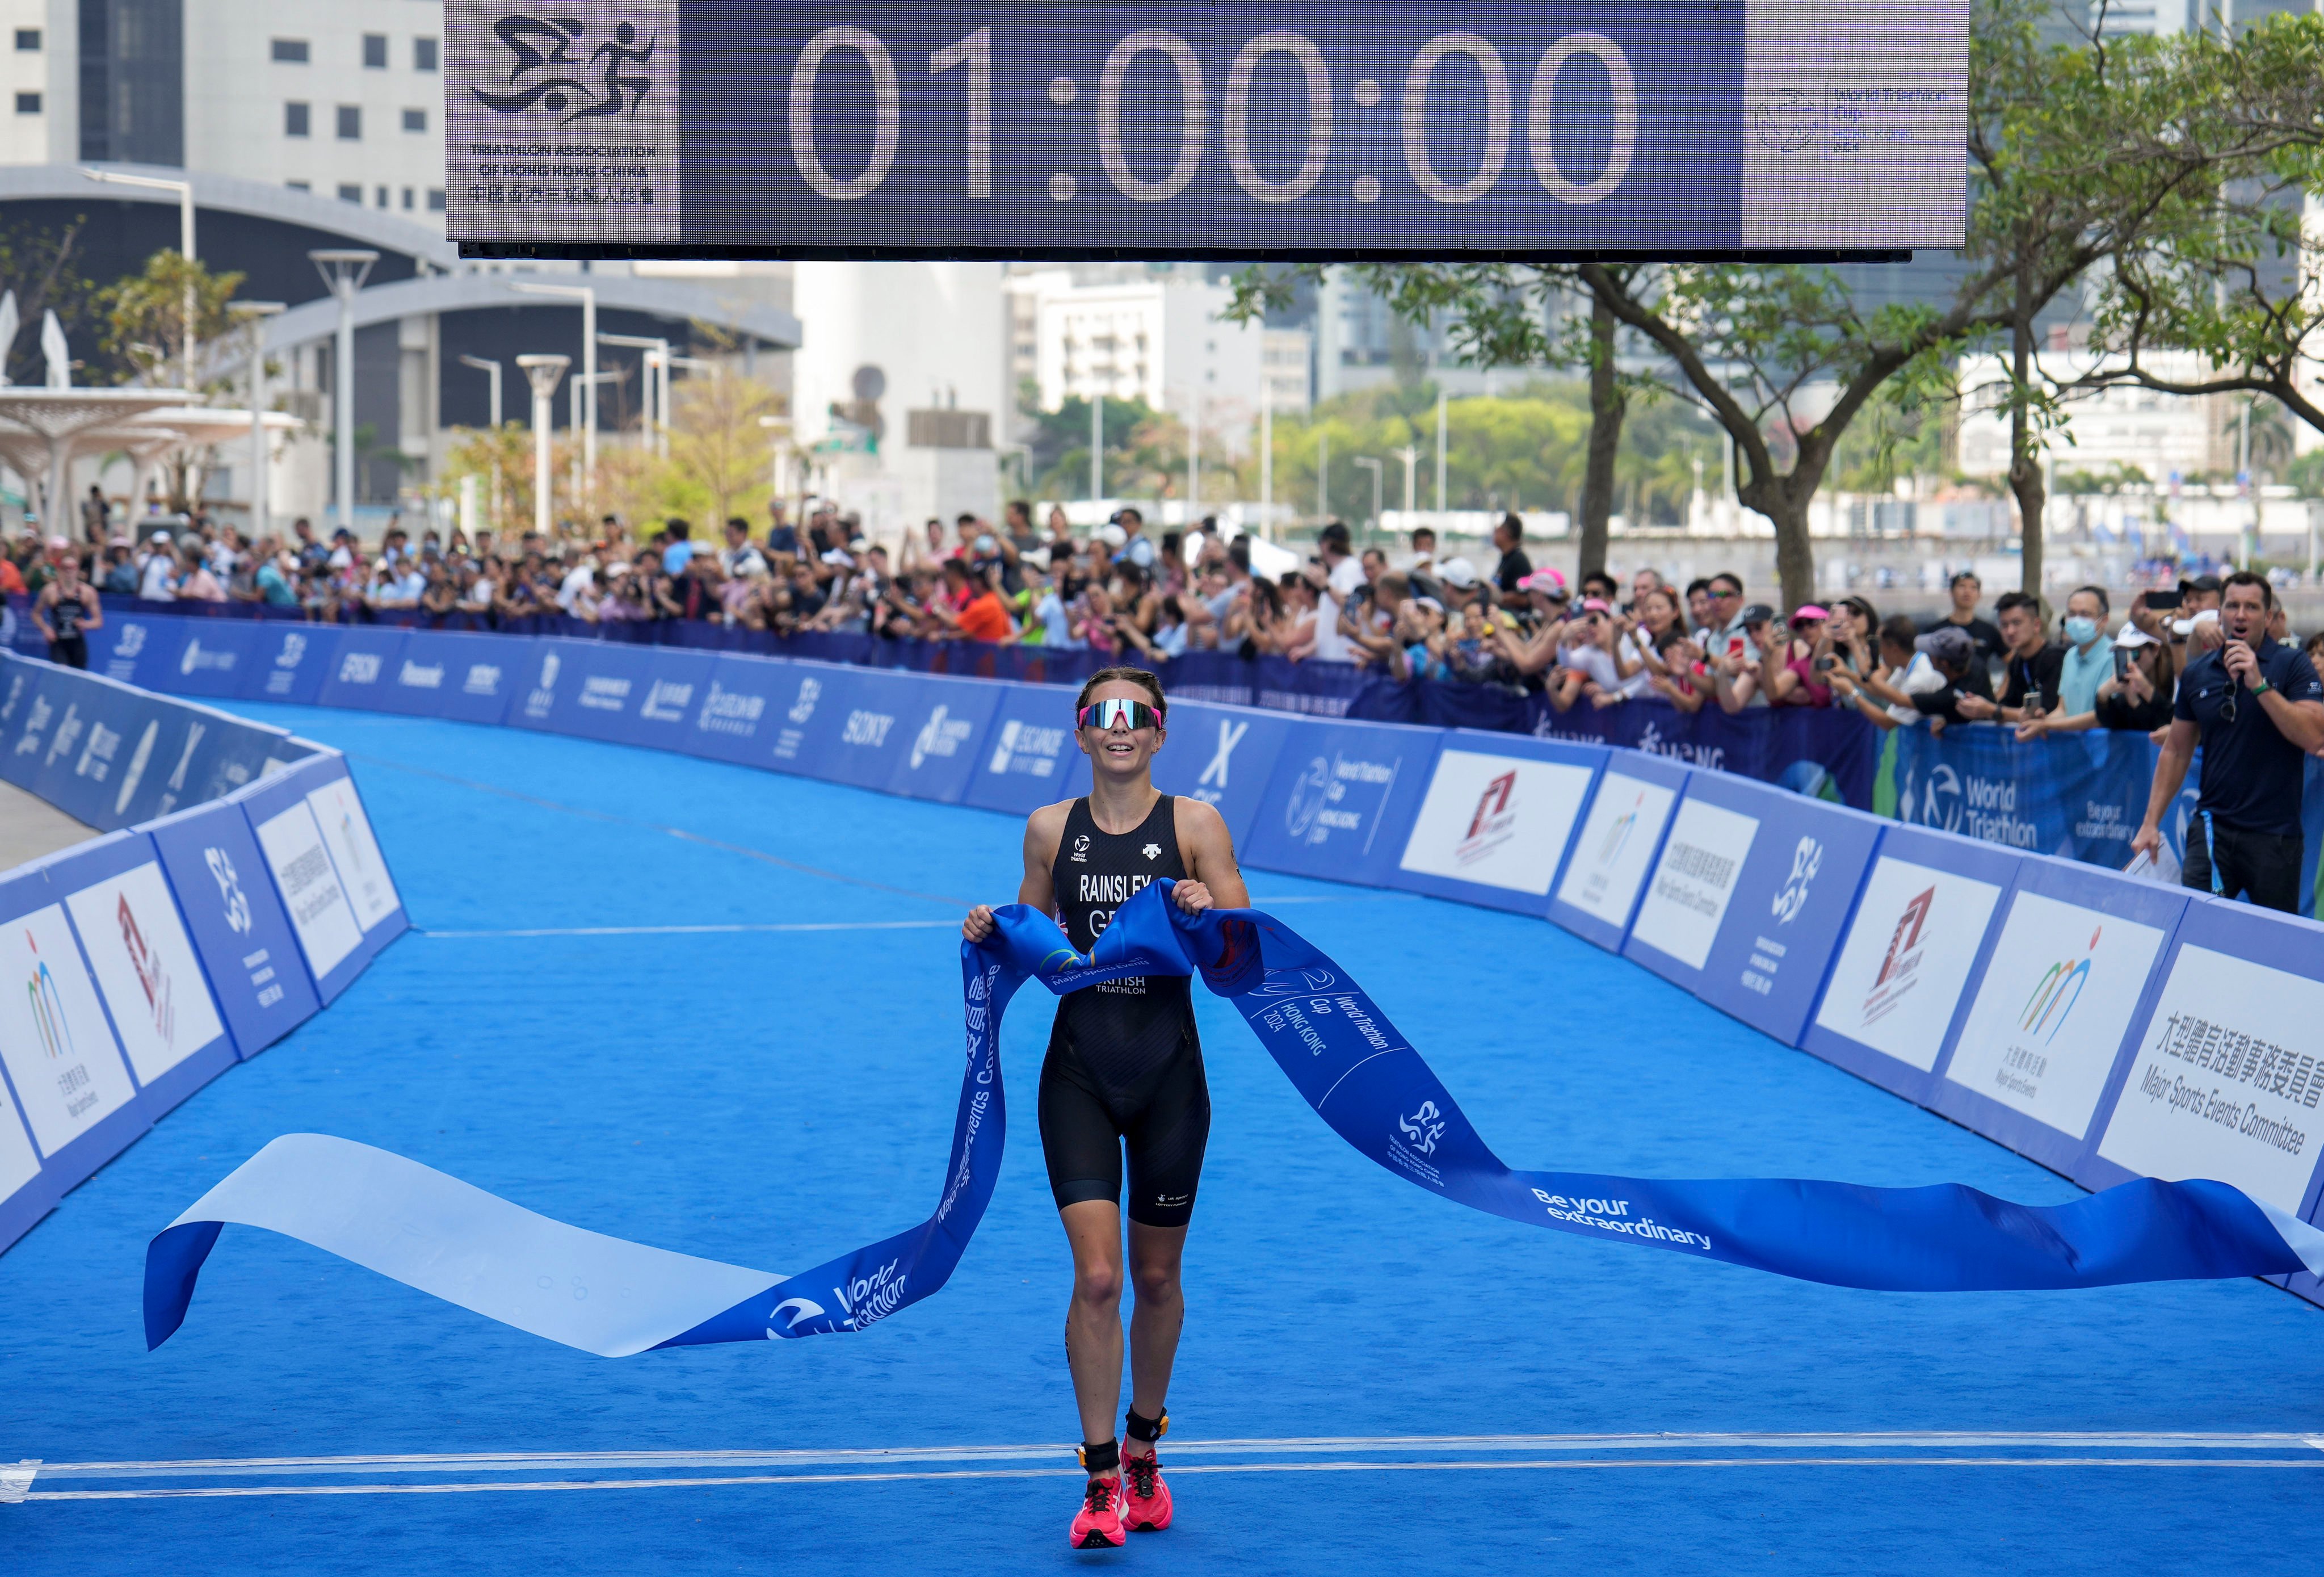 Sian Rainsley won the Hong Kong leg of the World Triathlon Cup, but the wrong national anthem was played after she received her gold medal. Photo: Elson Li